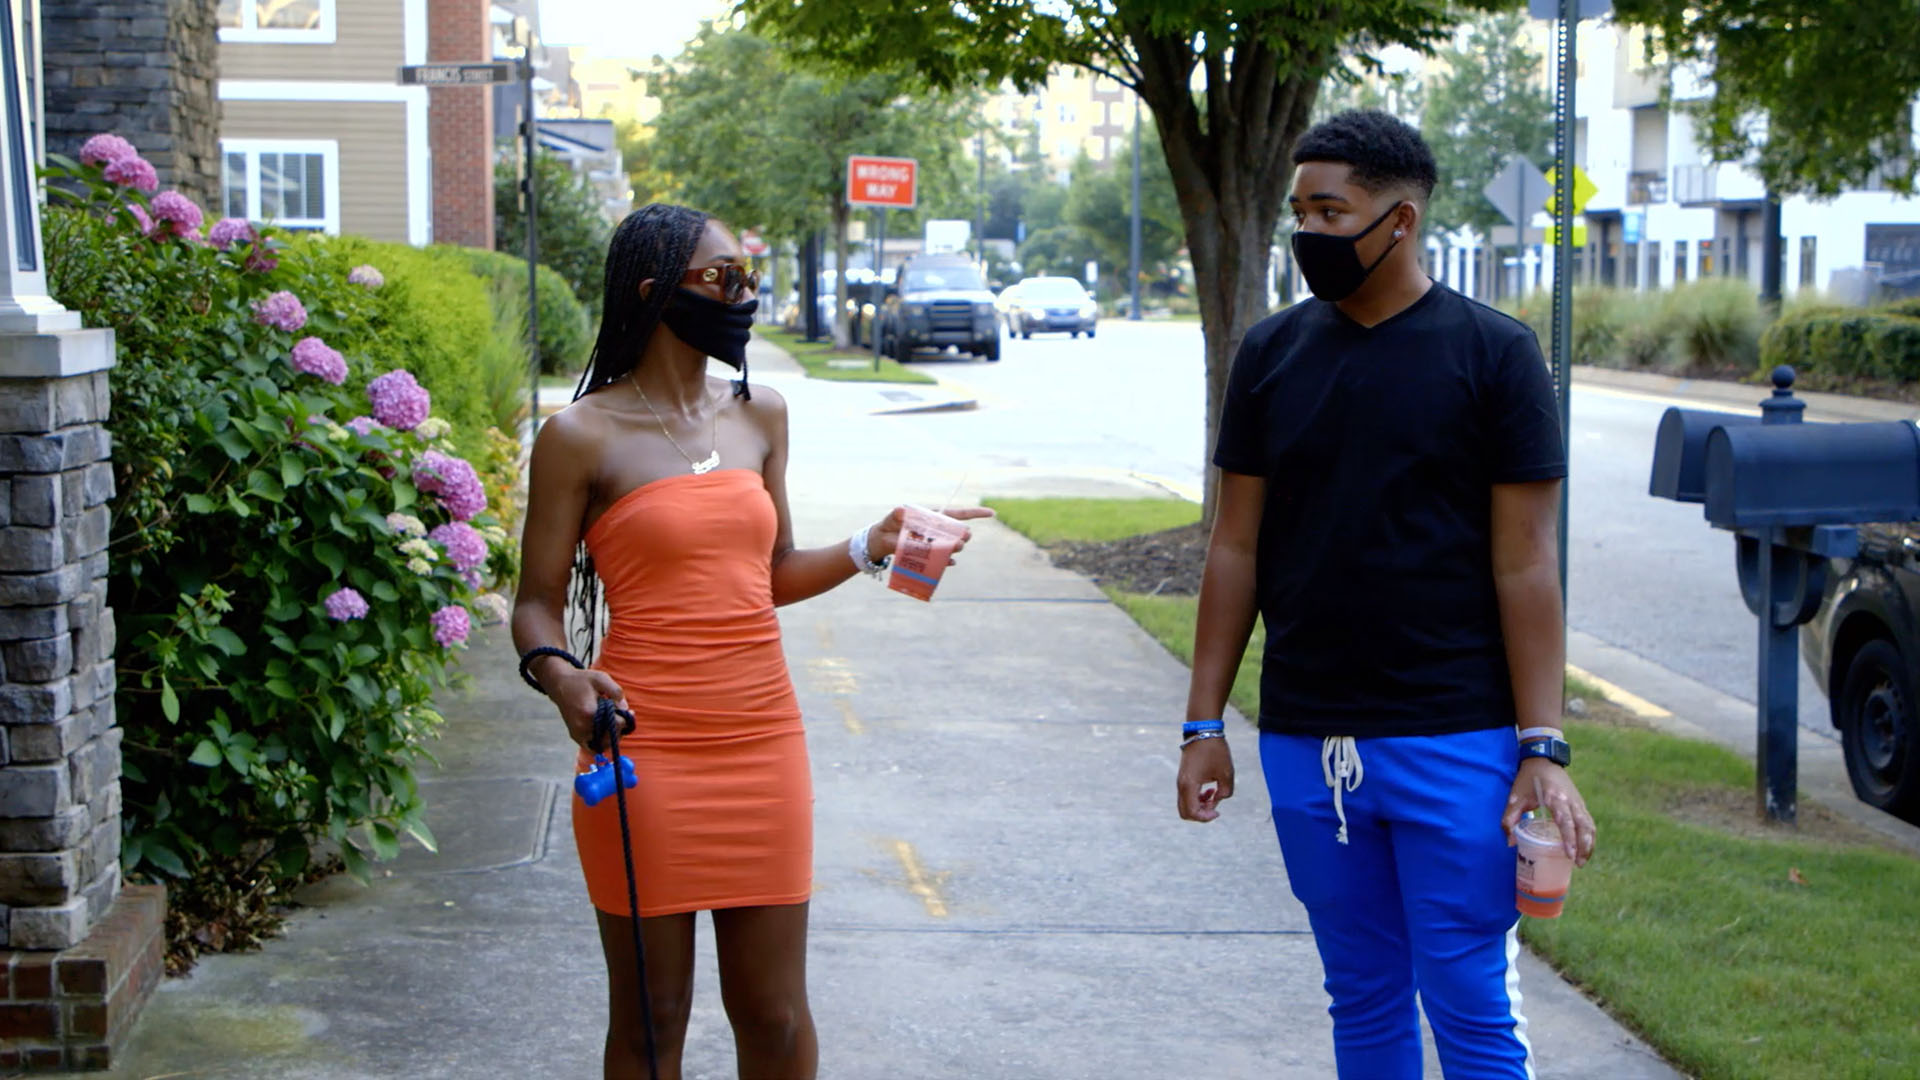 WE Ask, You Answer: Can Shaniah & Ayana Repair Their Friendship?